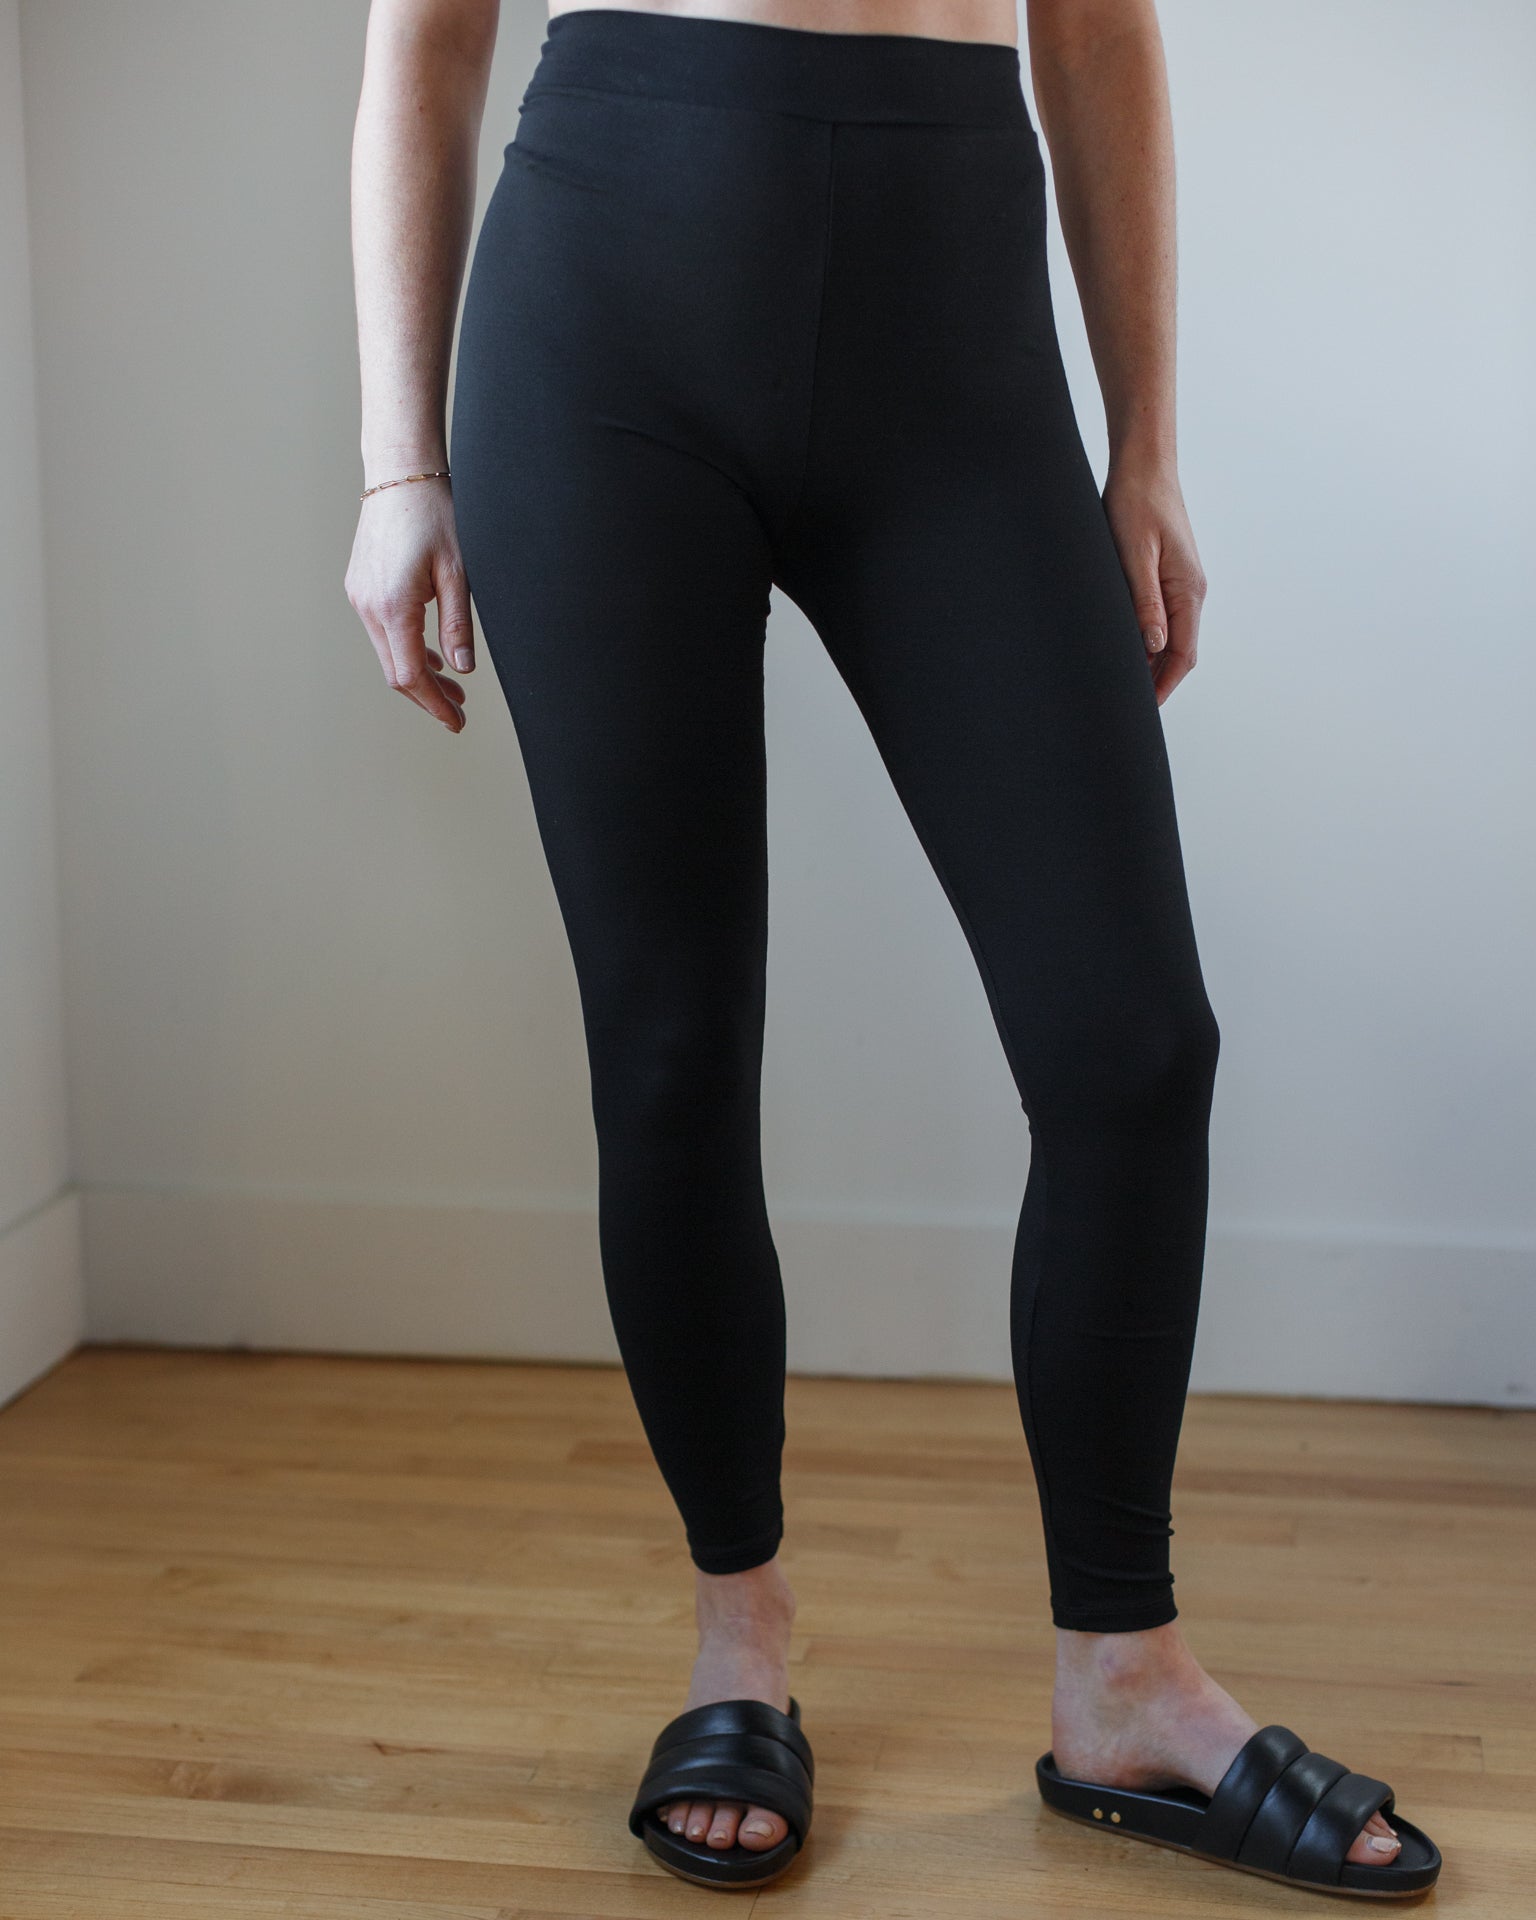 http://www.blissboutiques.com/cdn/shop/products/bliss-bouqitues-only-hearts-sf-high-waist-leggings-in-black-30856138784865.jpg?v=1671859139